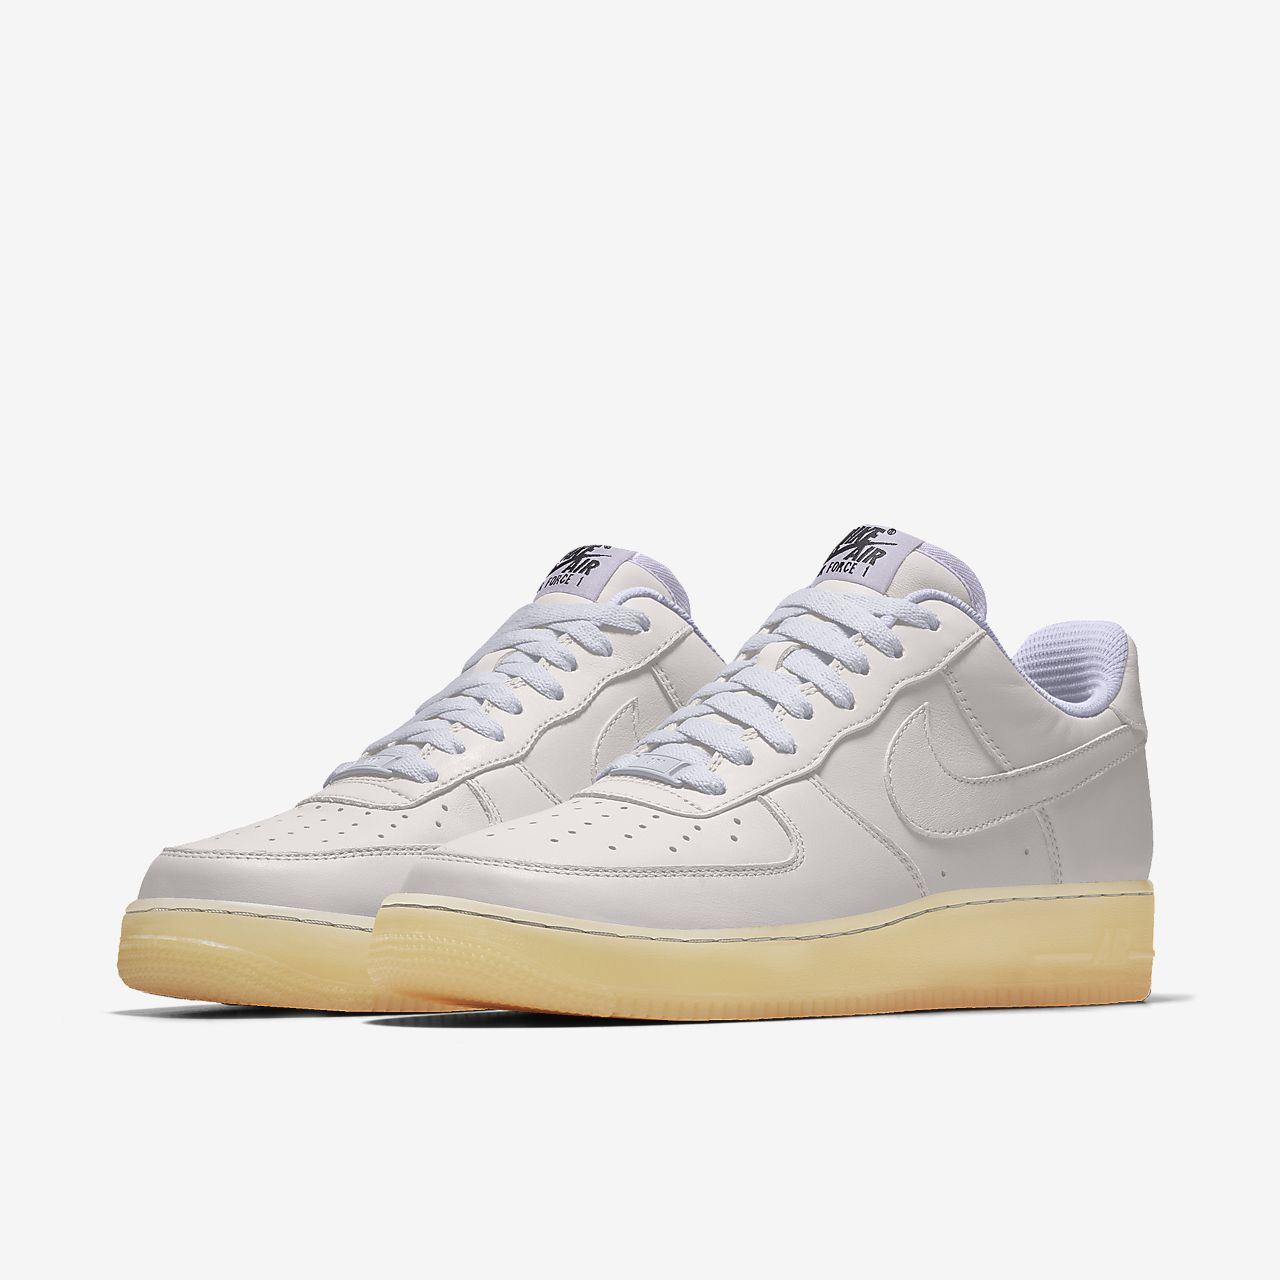 NIKE Official]Nike Air Force 1 Low By 